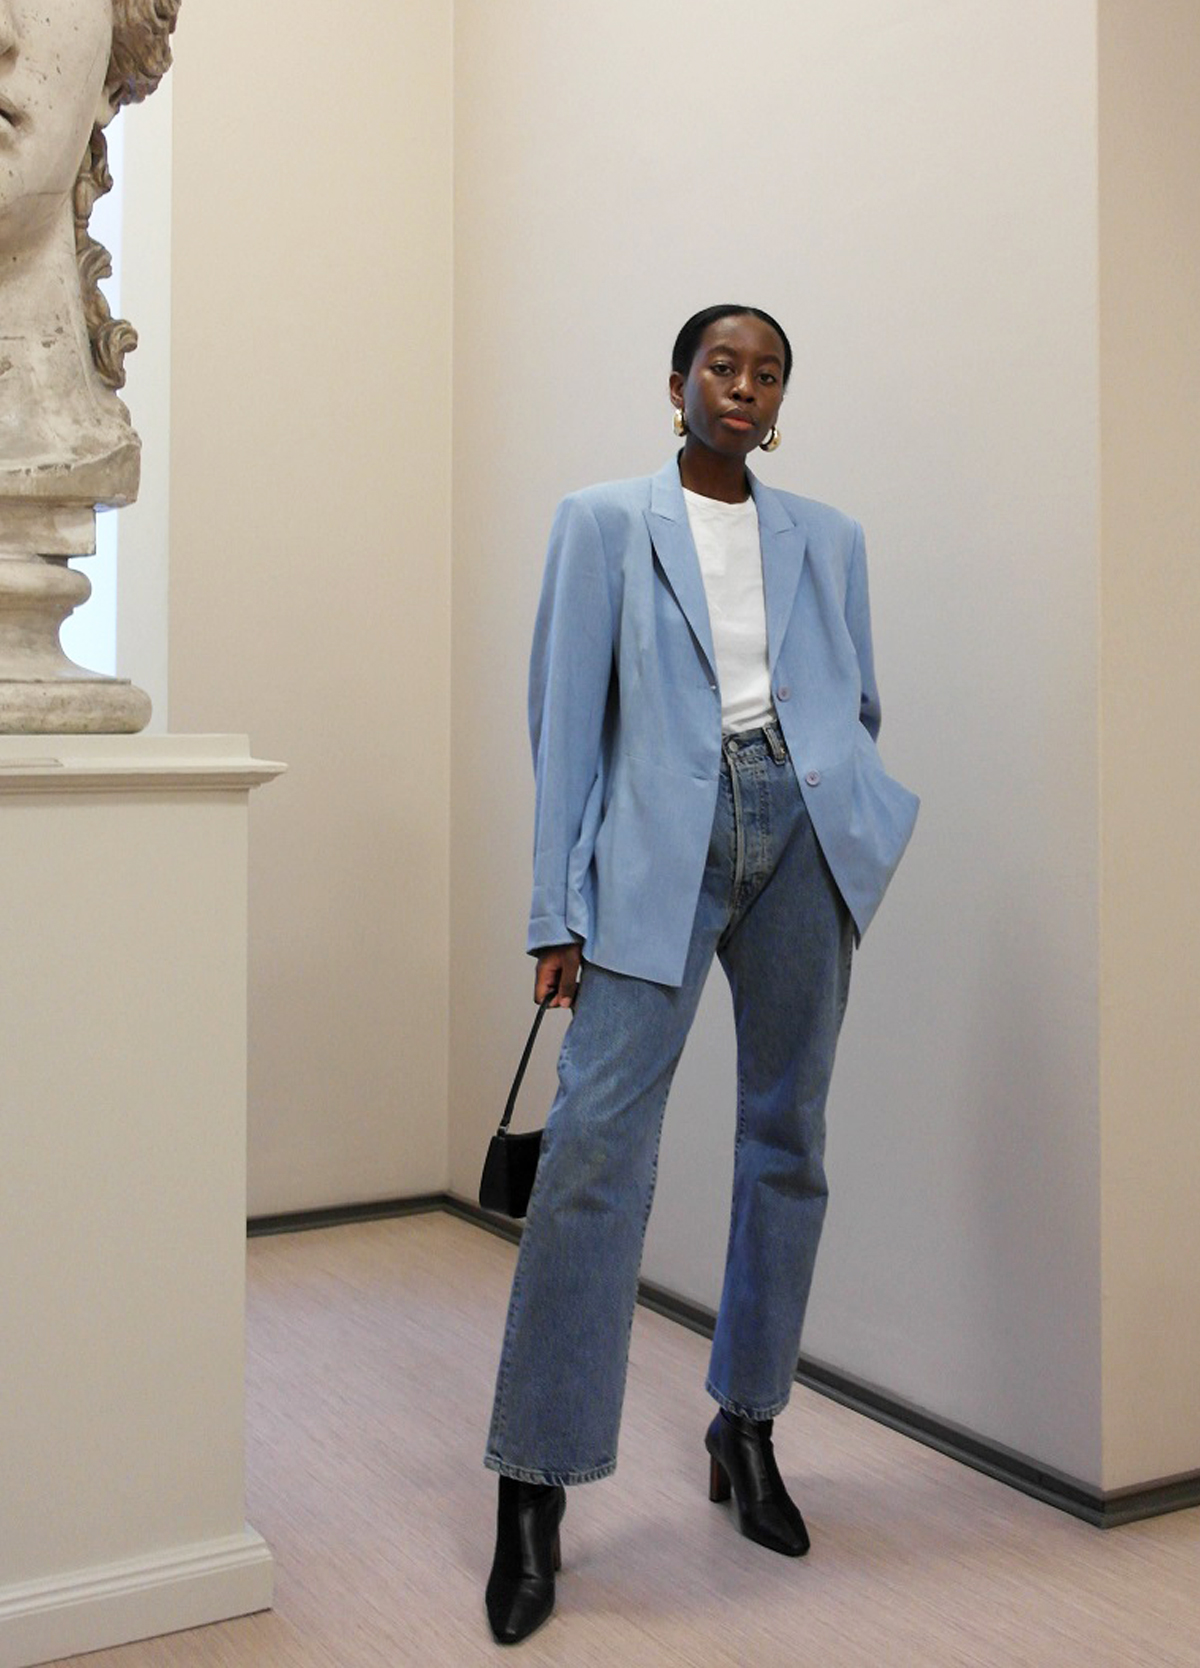 Colour Trends 2019 Street Style: Powder blue outfit